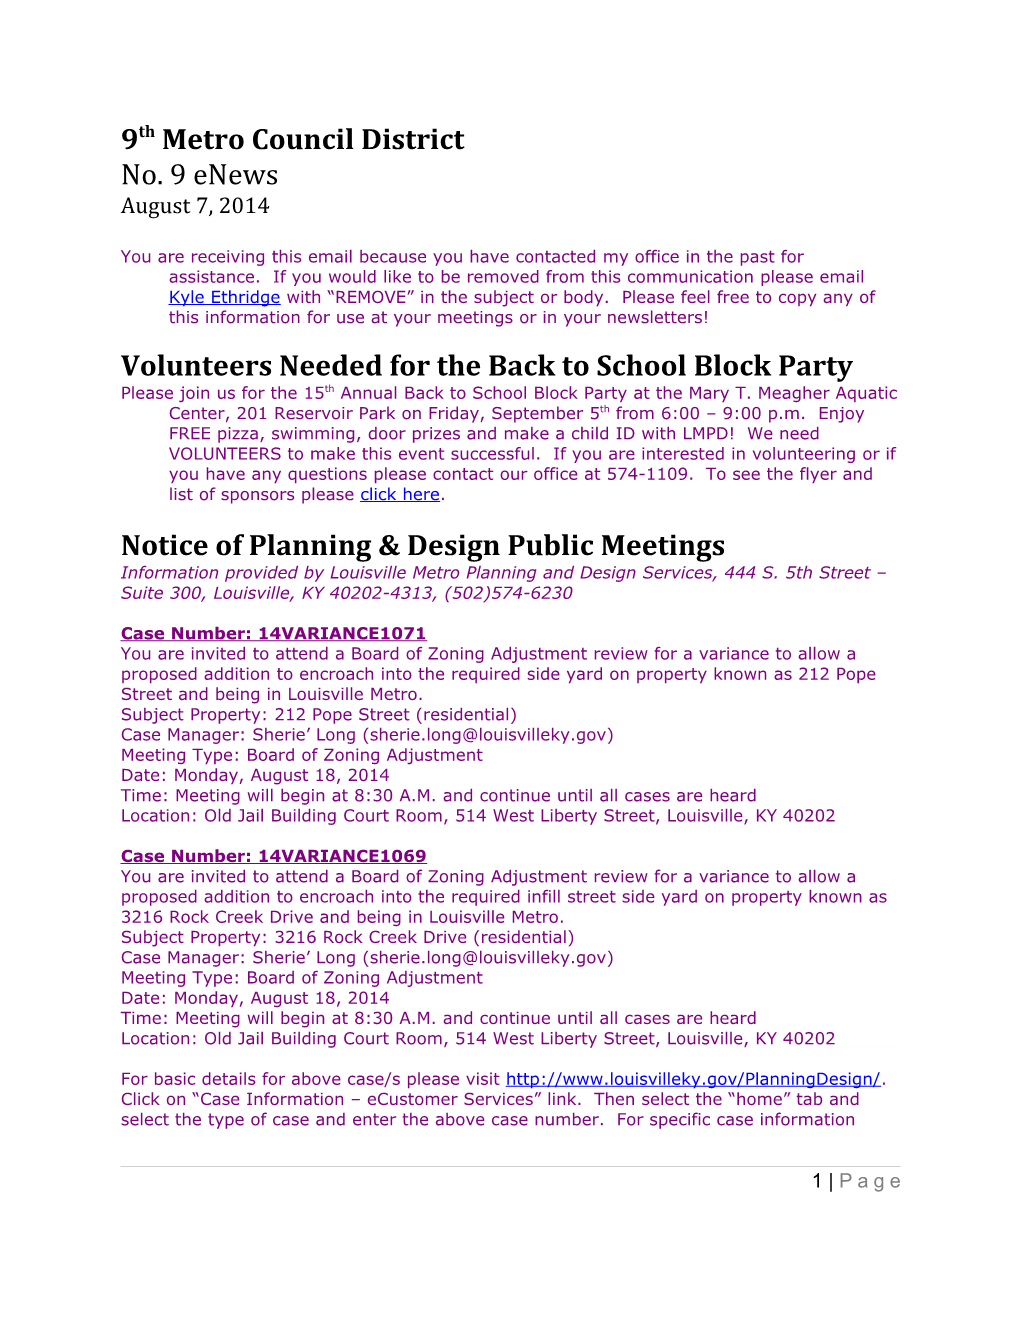 Volunteers Needed for the Back to School Block Party